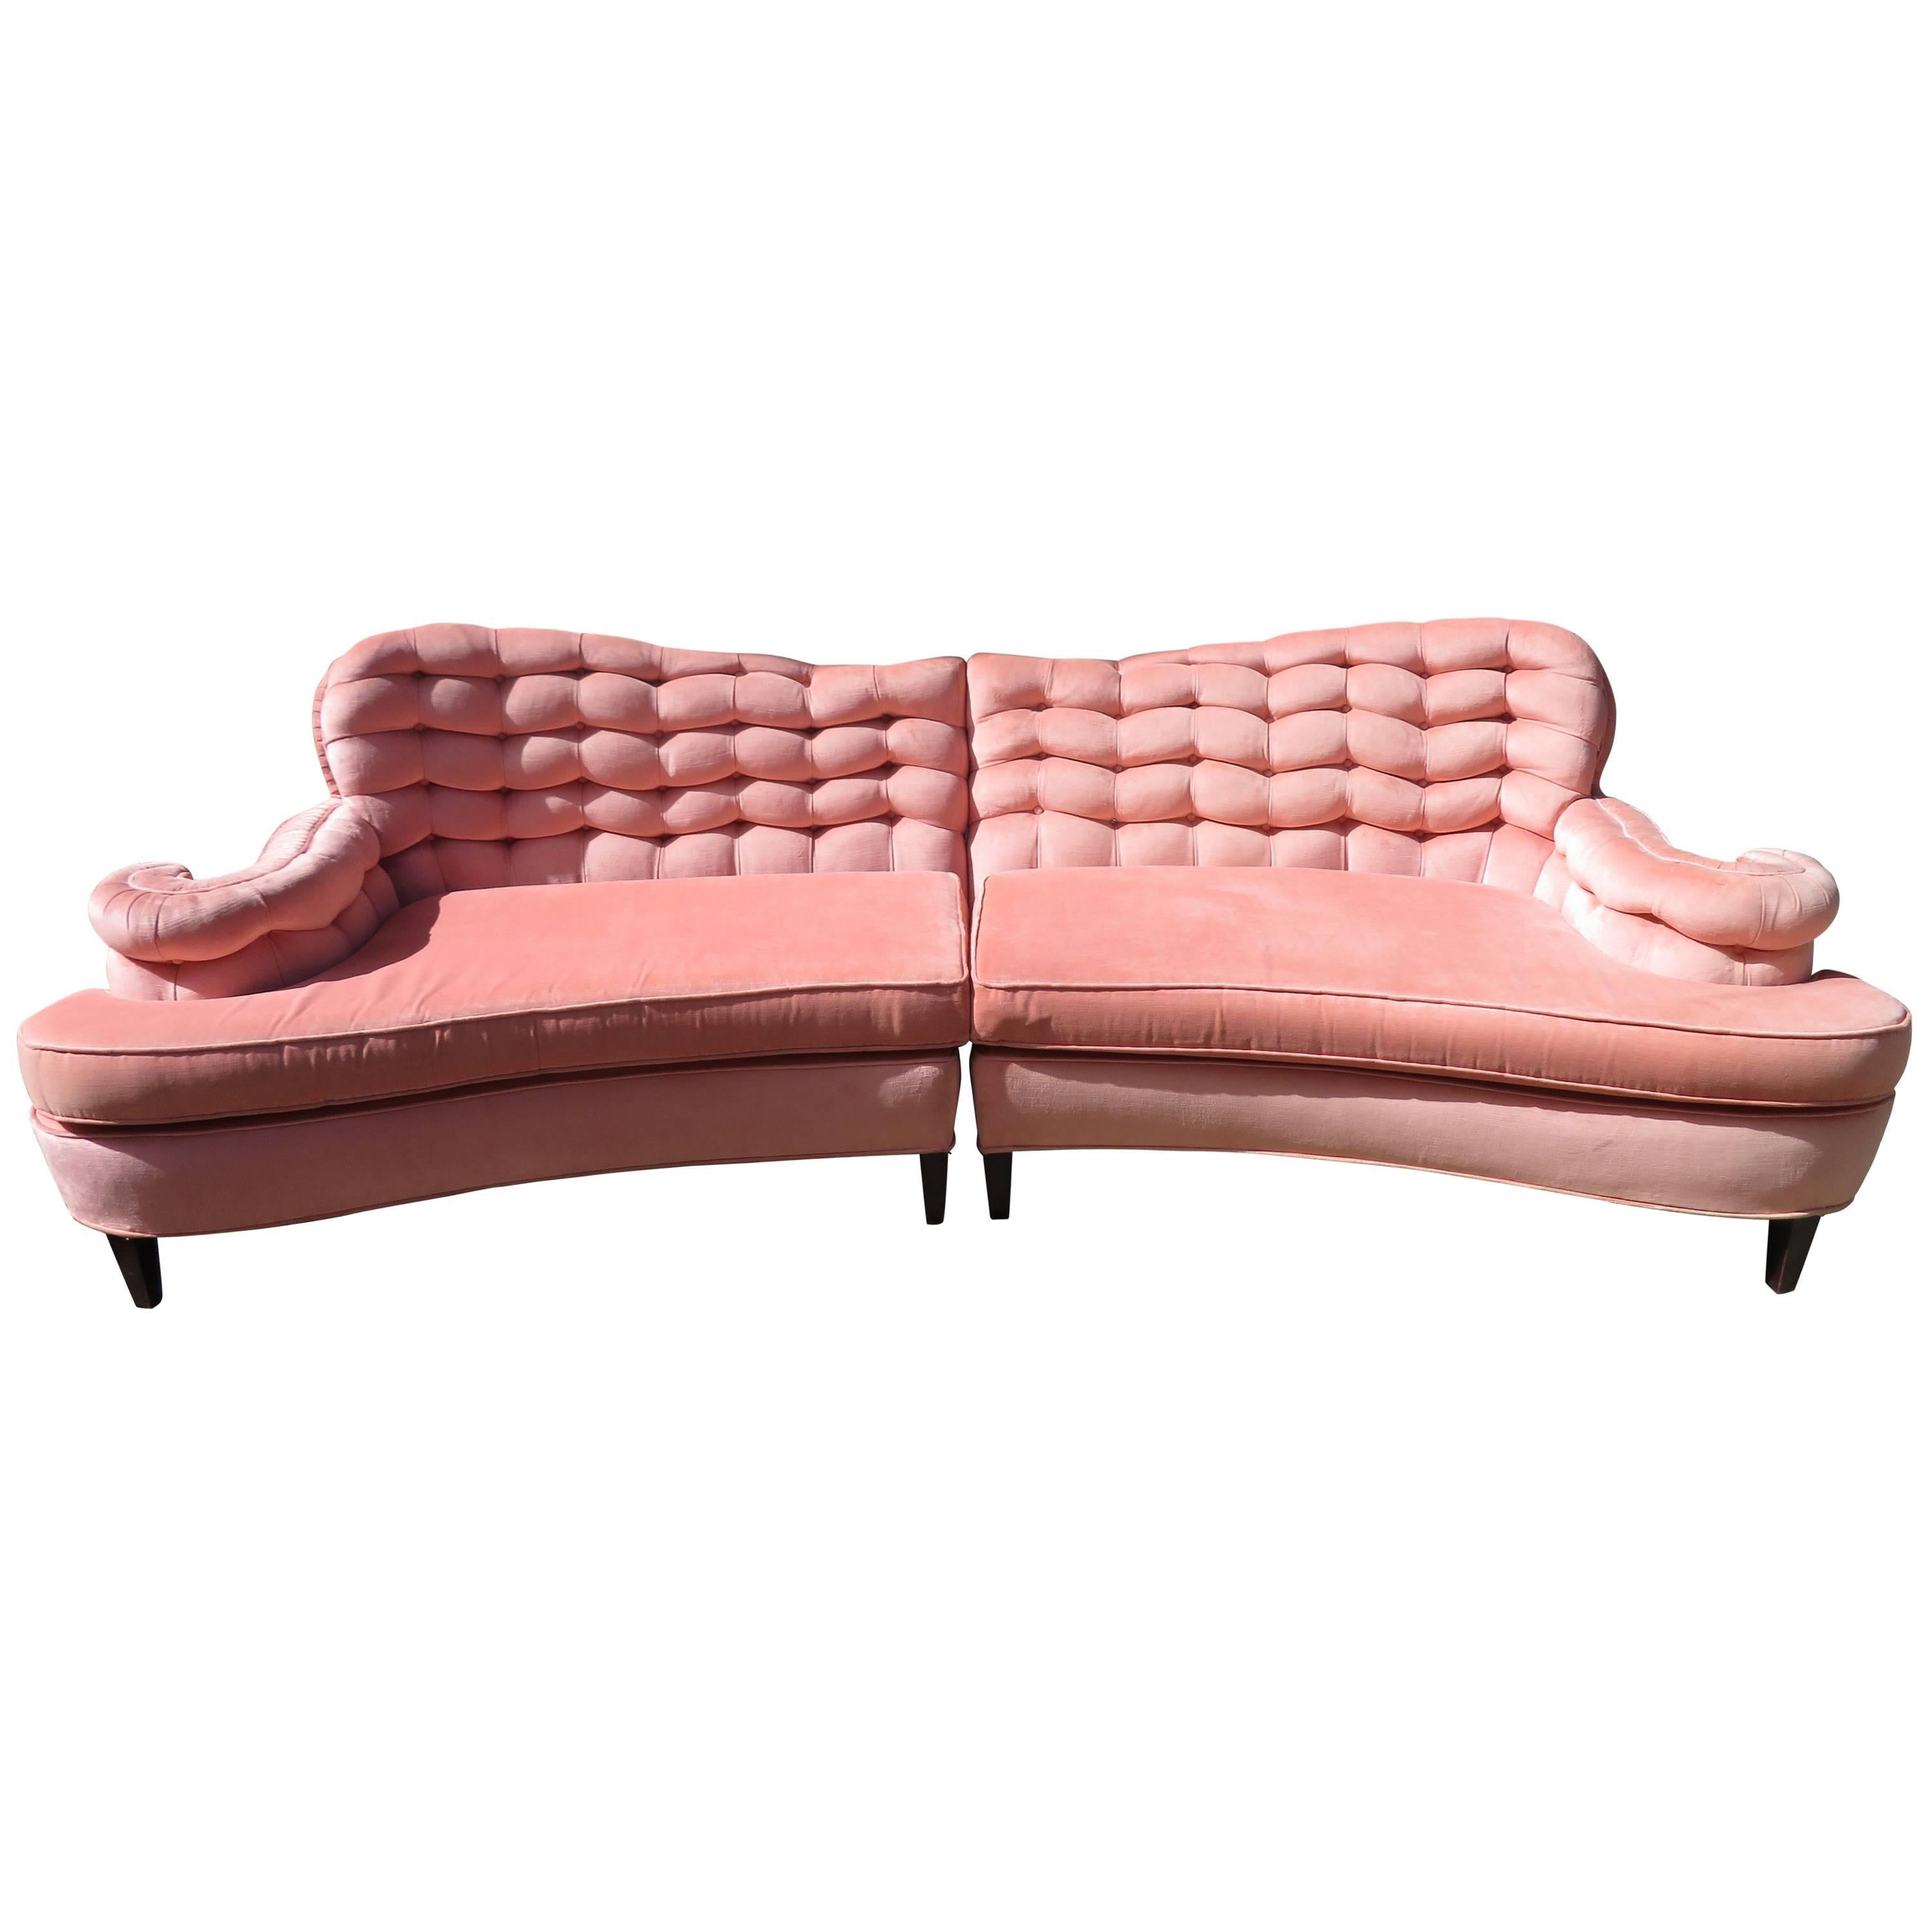 Glamorous Dorothy Draper Scrolled Arm Curved Two-Piece Sofa Hollywood Regency